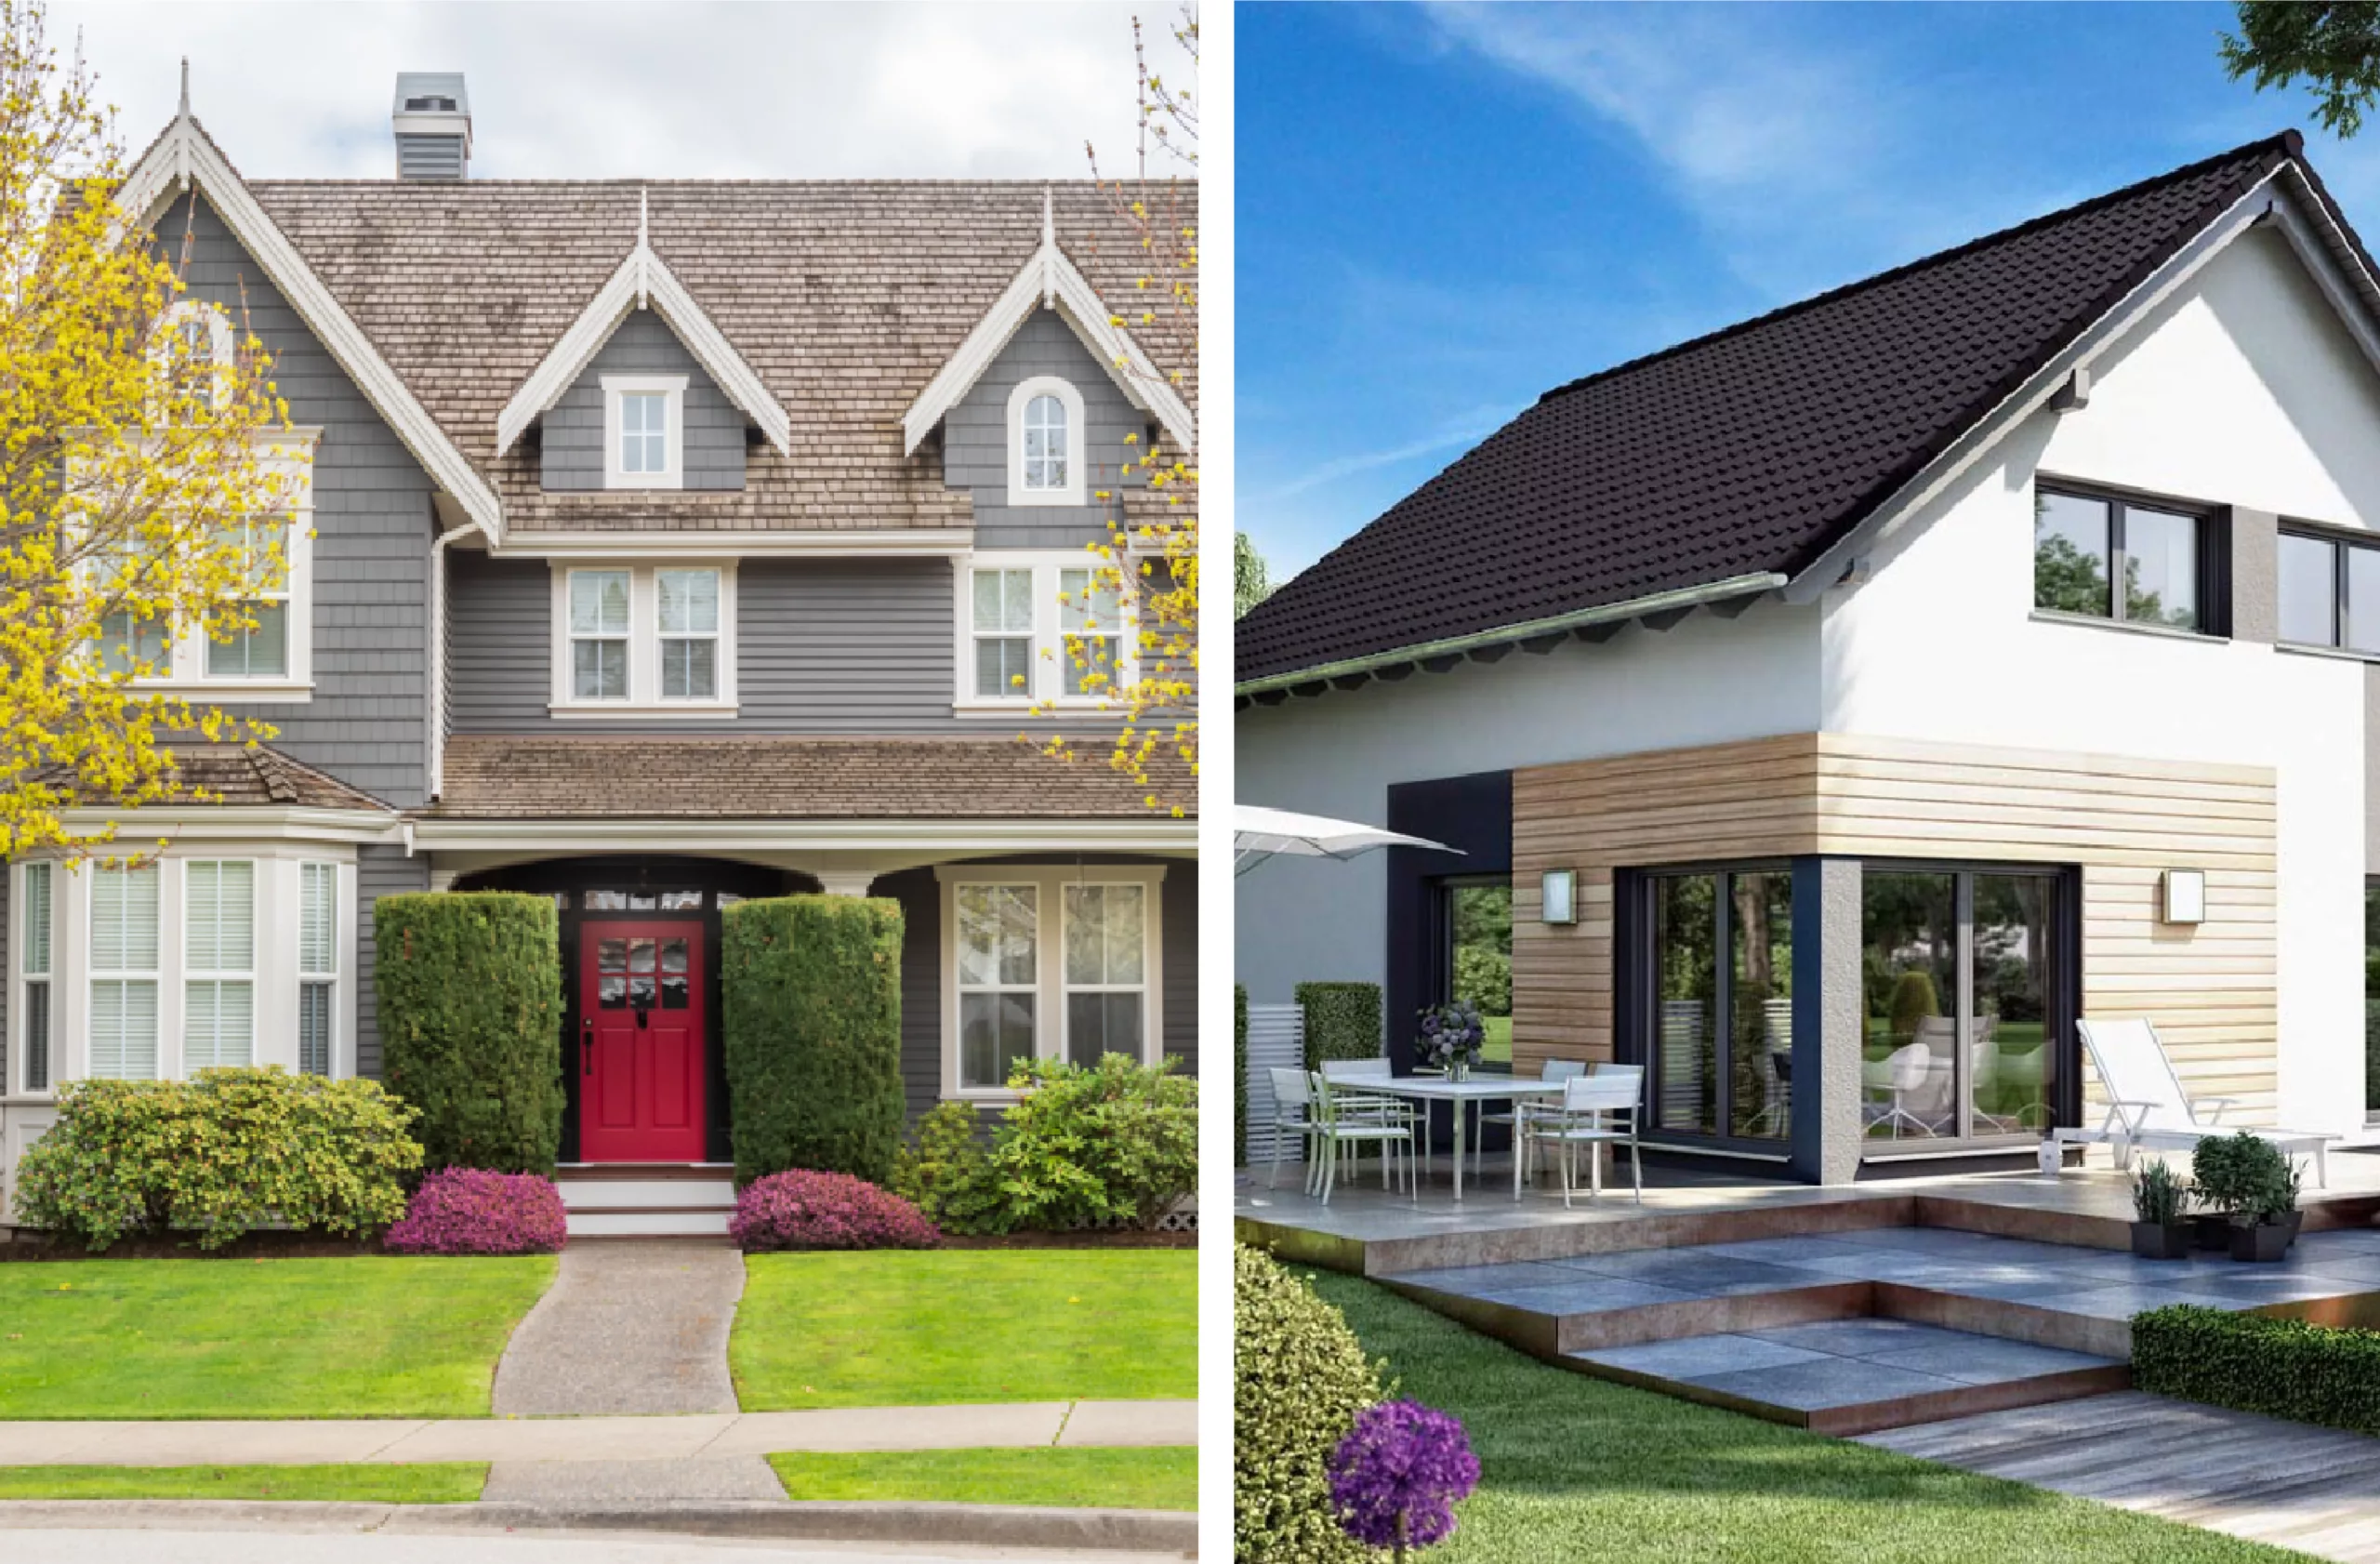 German Homes vs. American Homes – The Surprising Differences